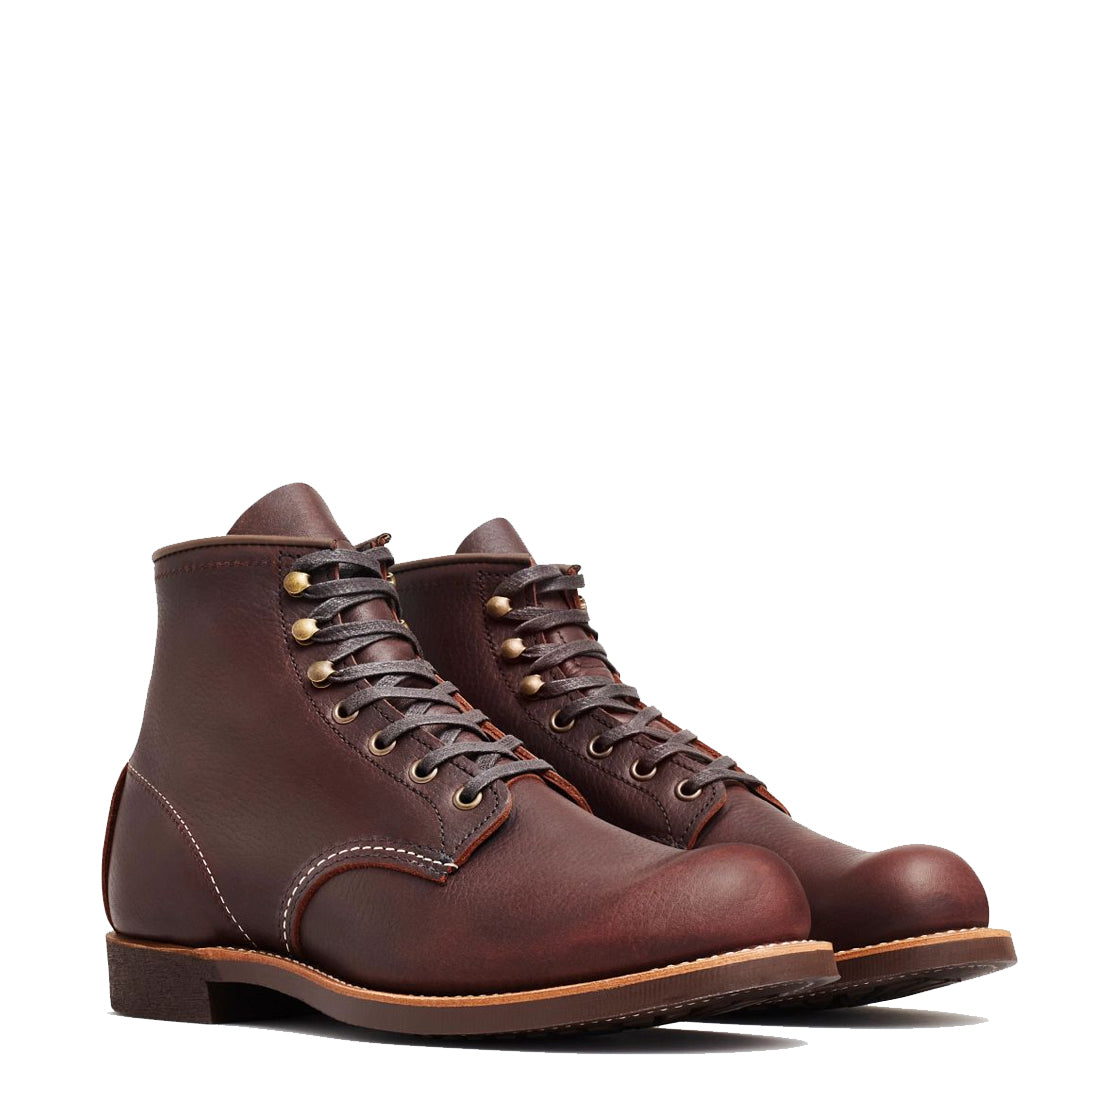 Red Wing Blacksmith Boots Briar Oil Slick | The Sporting Lodge